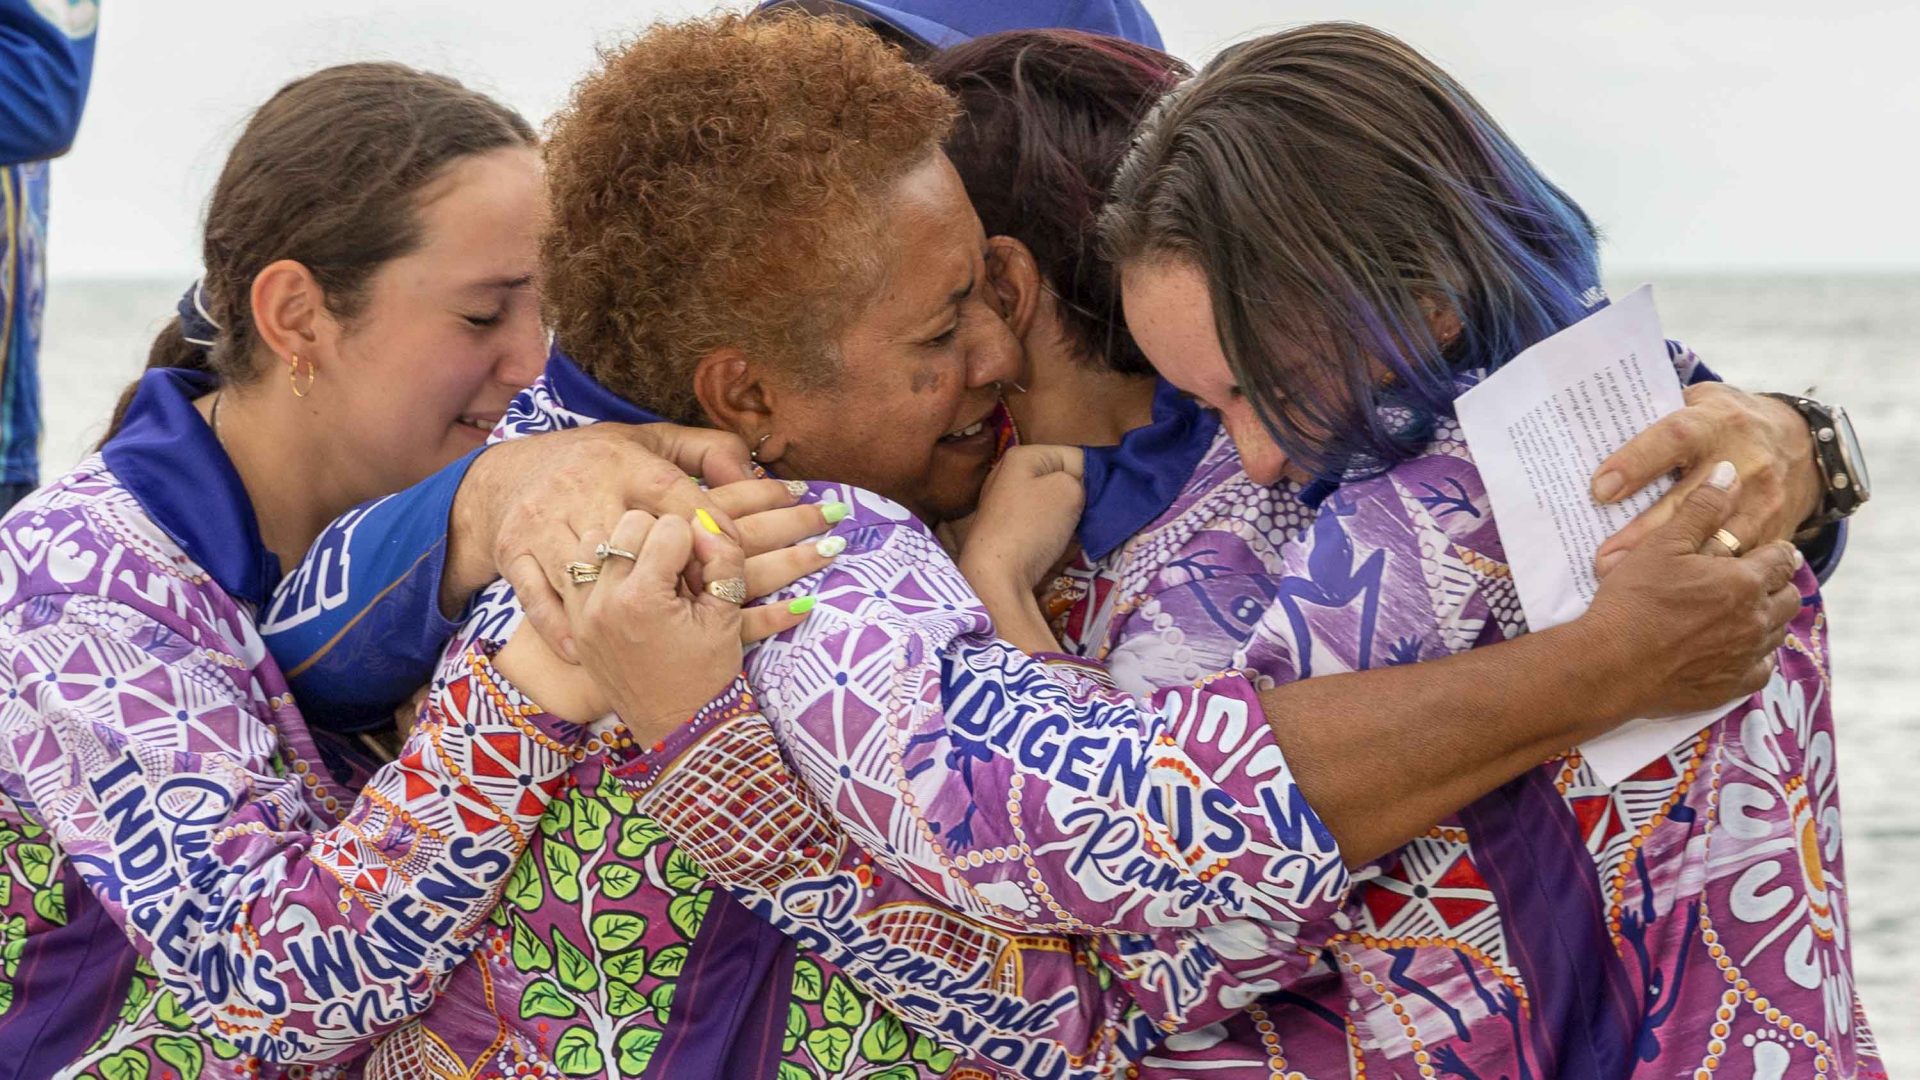 A group of Indigenous rangers hug each other in celebration of a prize win..